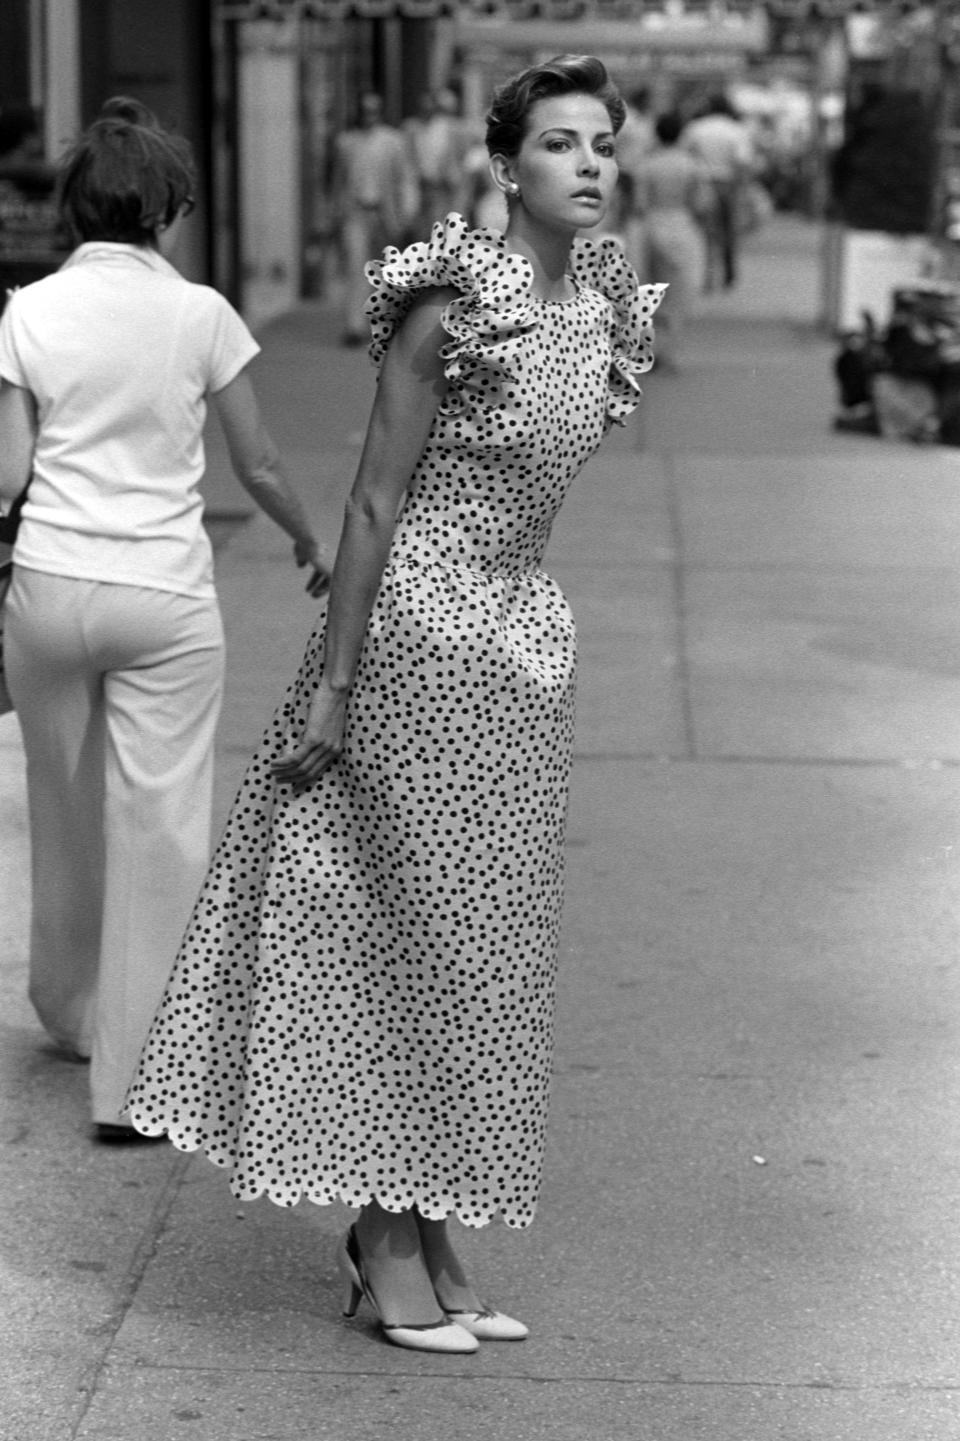 A model poses in a scalloped polka-dot dress from Carolina Herrera's 1983 Resort collection advance.